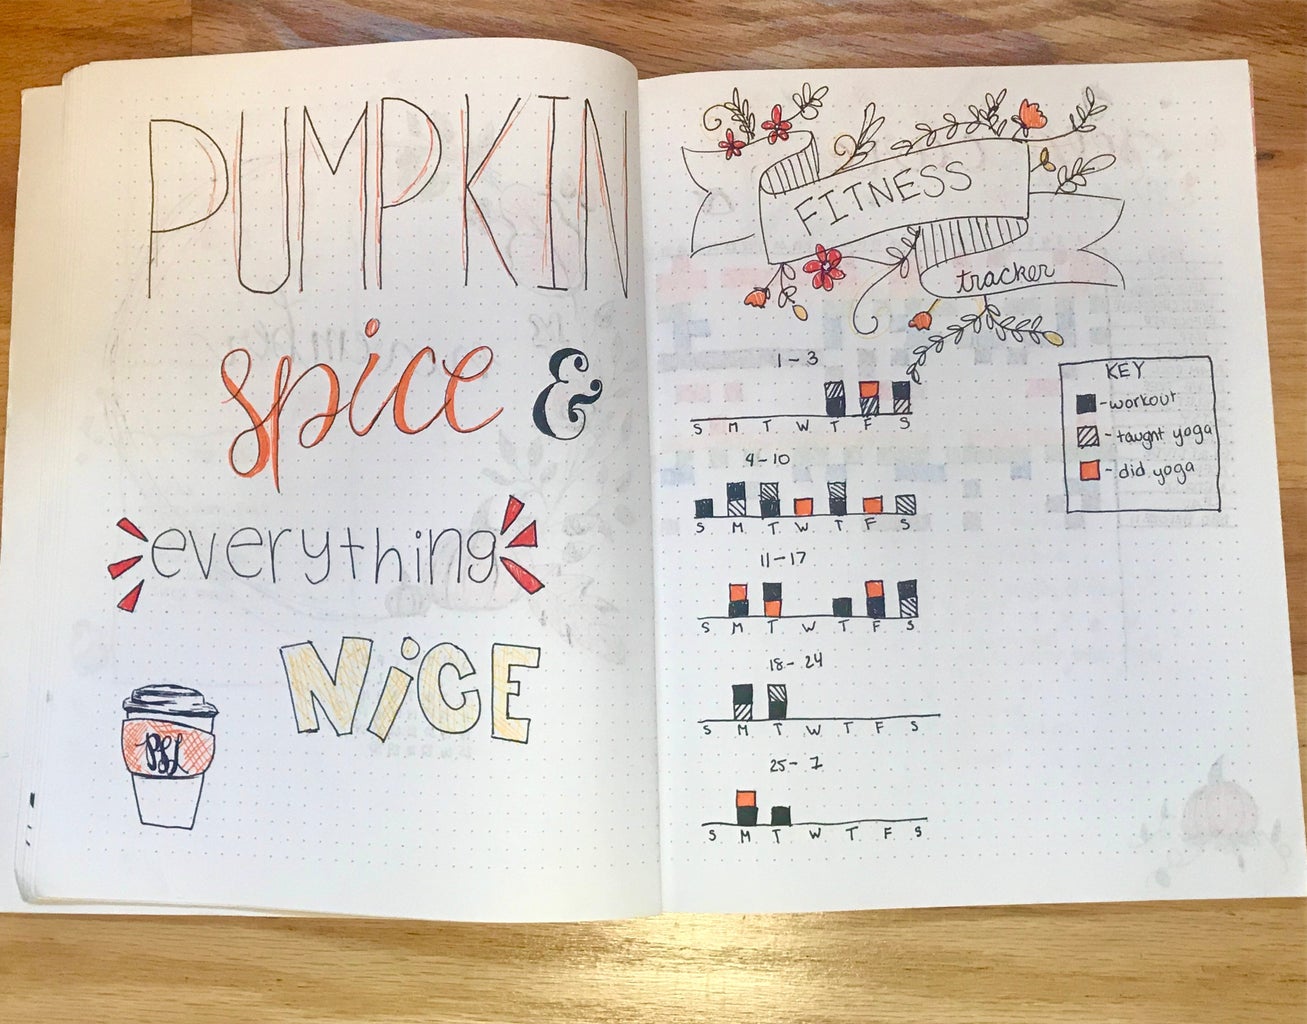 Bullet journal pumpkin spice quote and fitness tracker designed by me, Camryn Chernick.